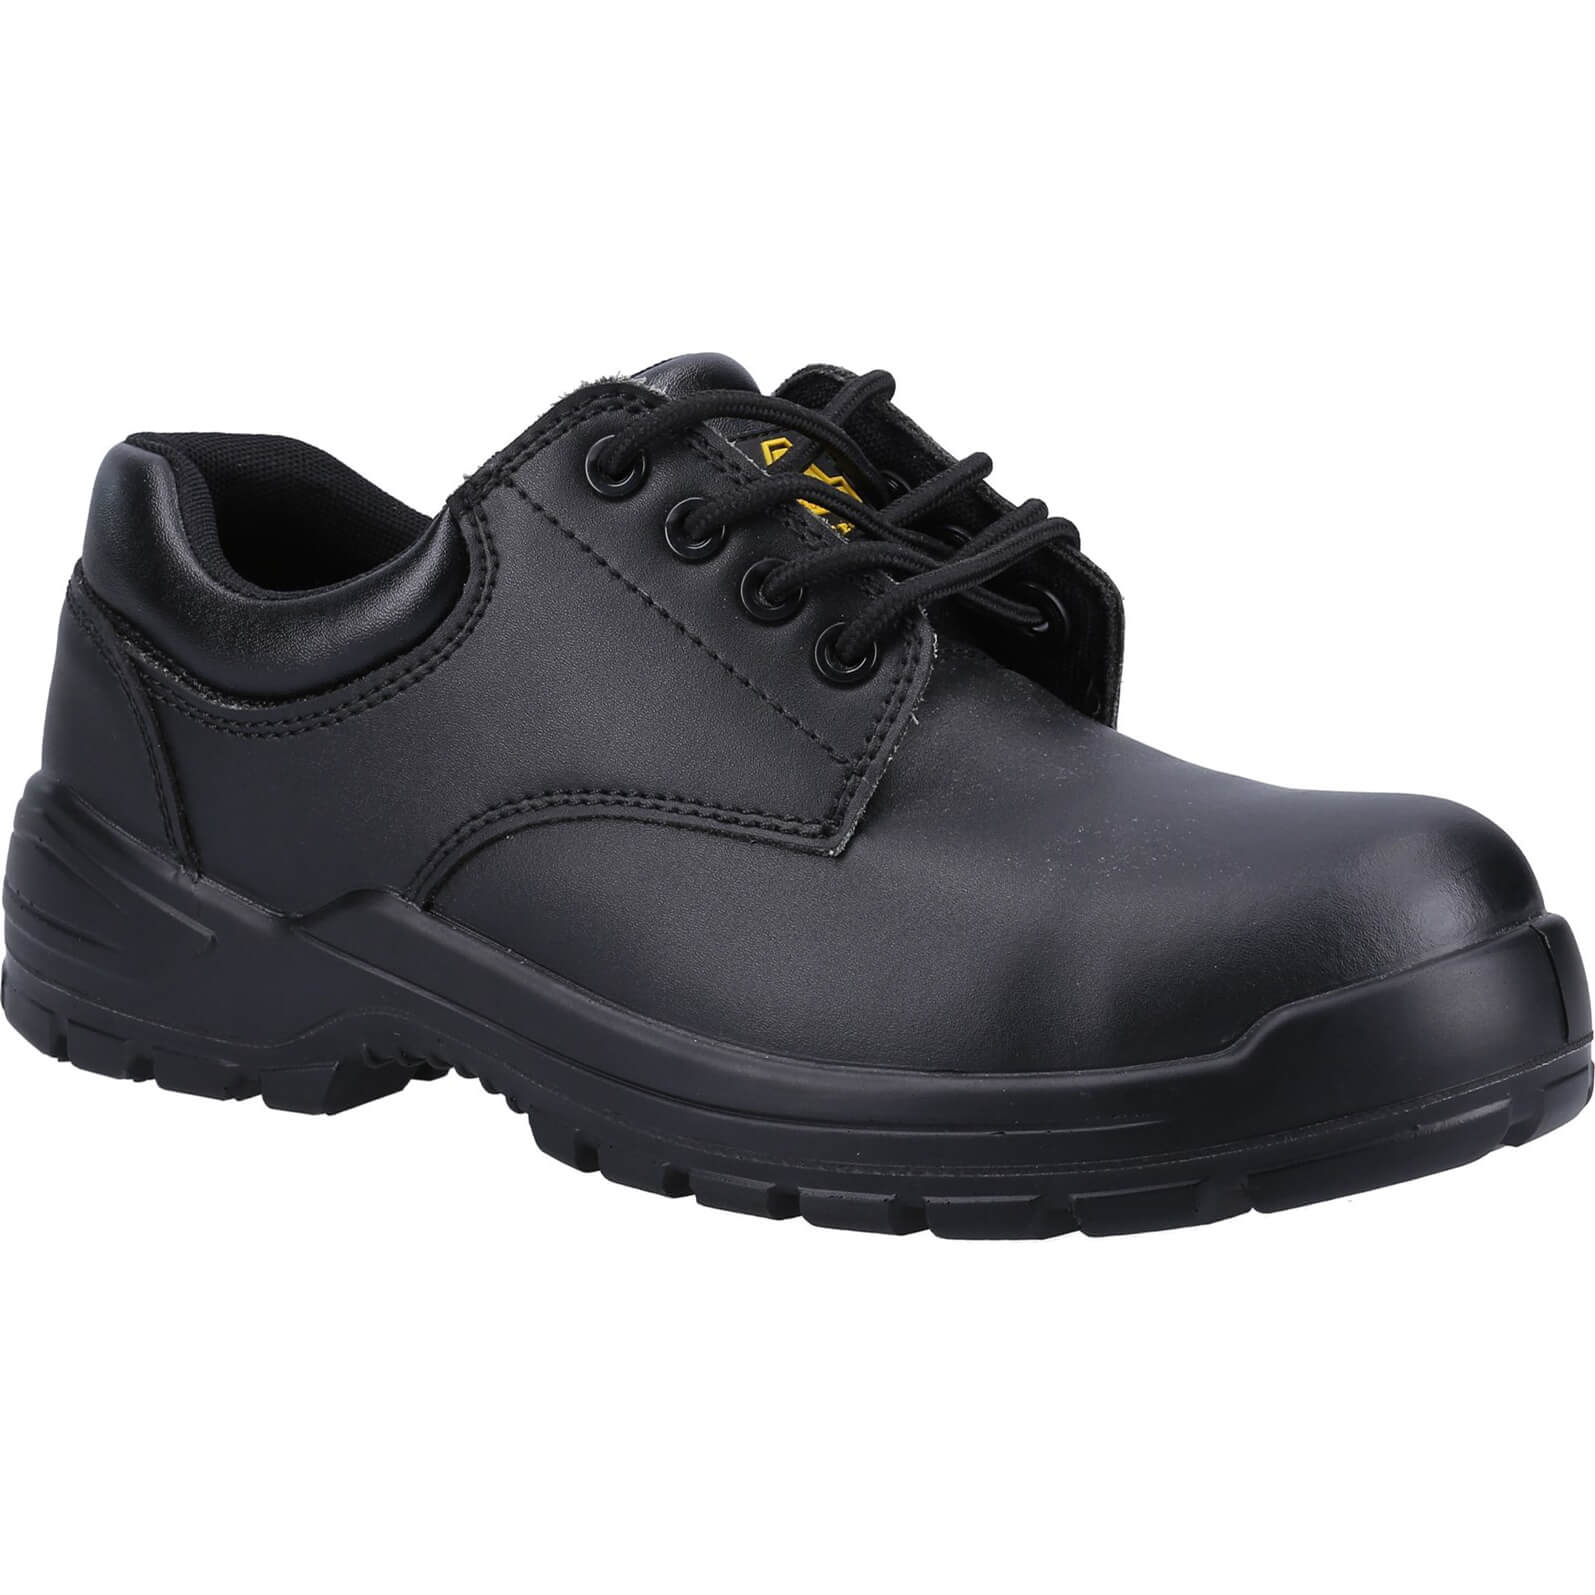 Image of Amblers Safety FS38C Metal Free Composite Gibson Lace Safety Shoe Black Size 3